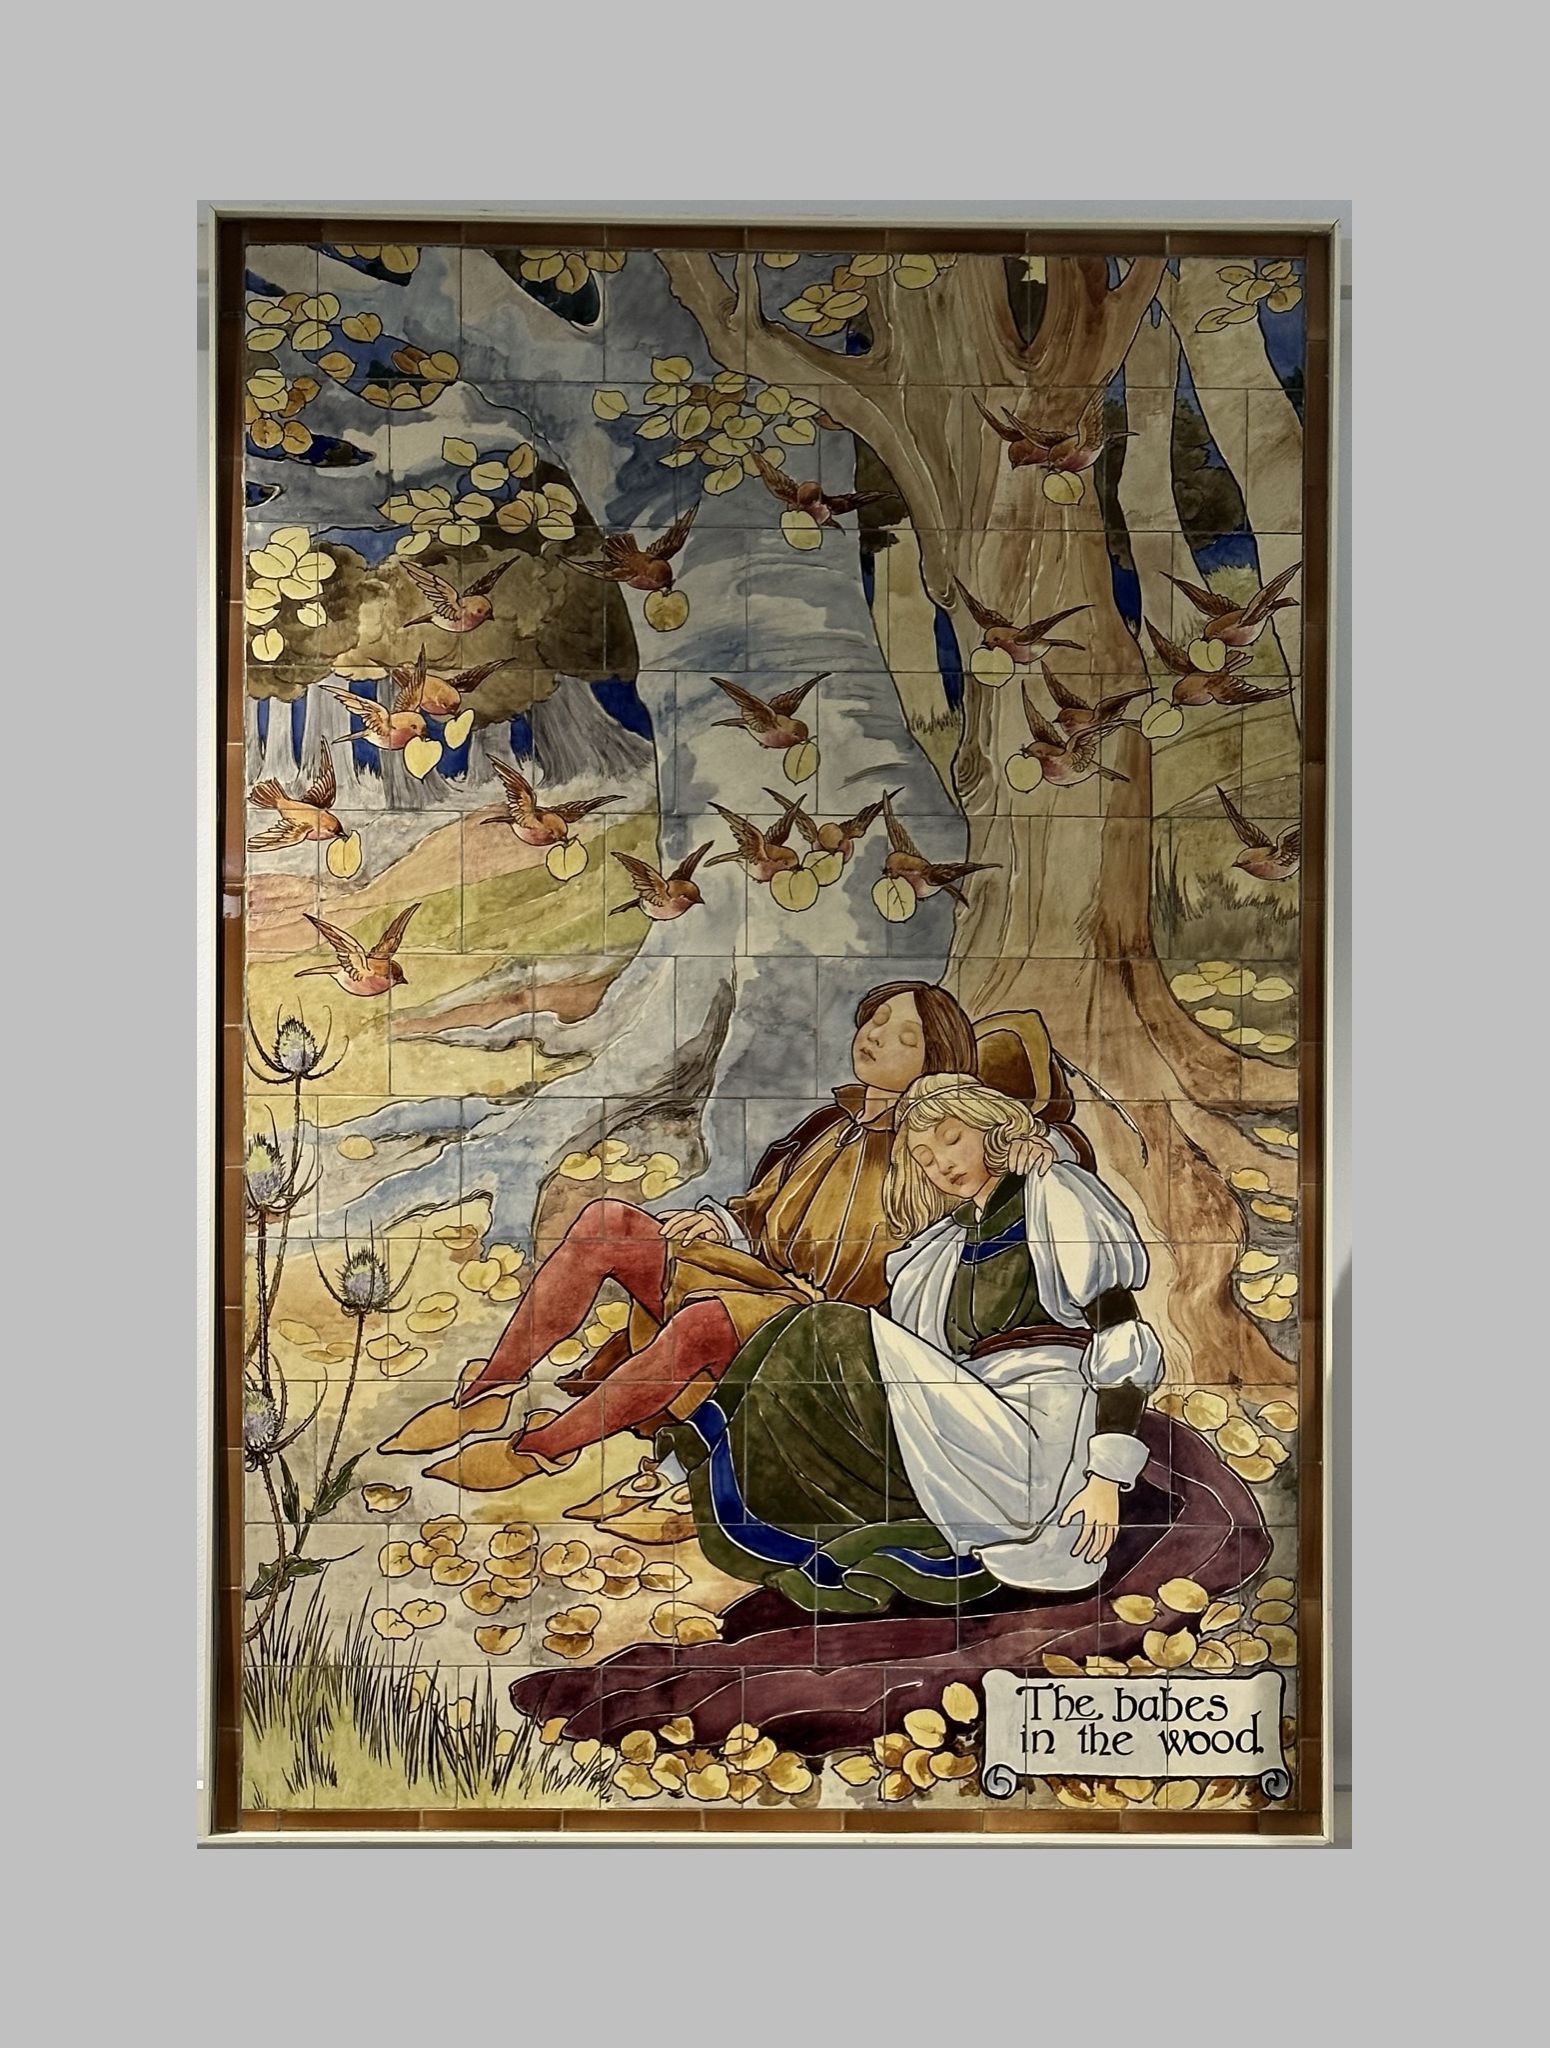 The Babes In The Wood scene painted on Doulton tiles (commissioned around 1900) from the Evelina Children's Hospital displayed in the long corridor at St Thomas' hospital.